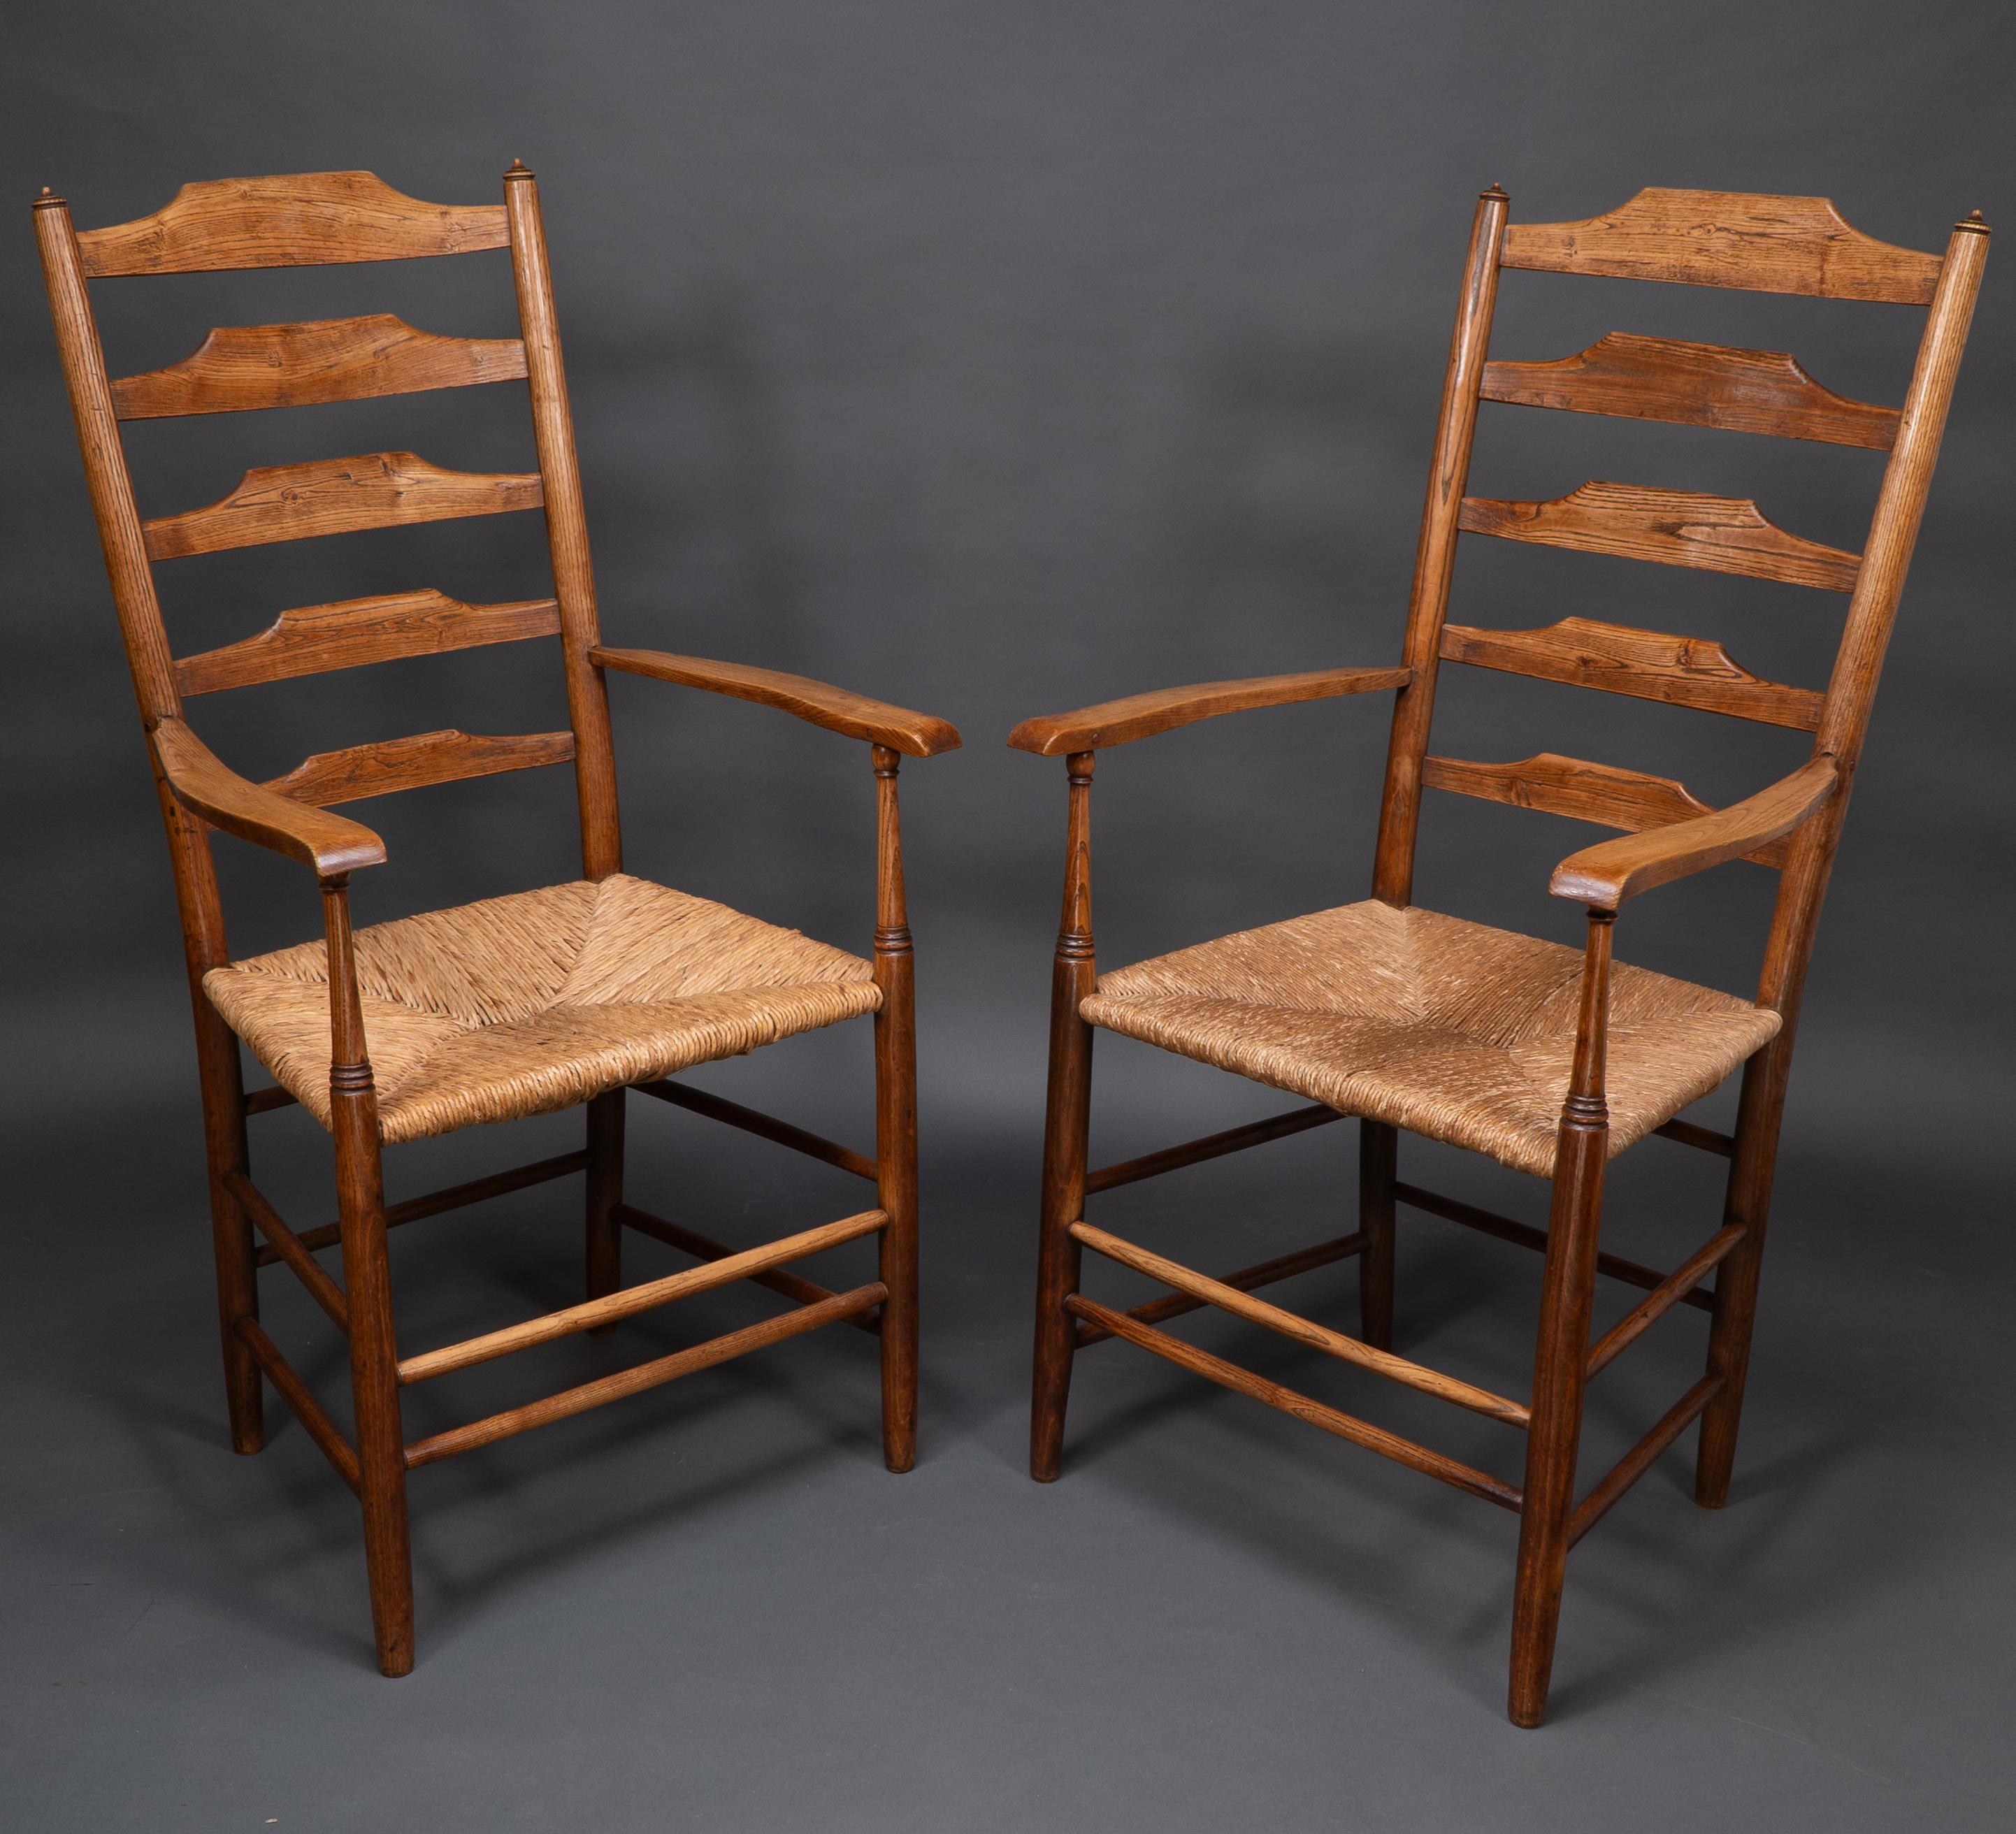 Philip Clissett A fine set of four early Arts & Crafts ash ladder back armchairs For Sale 5